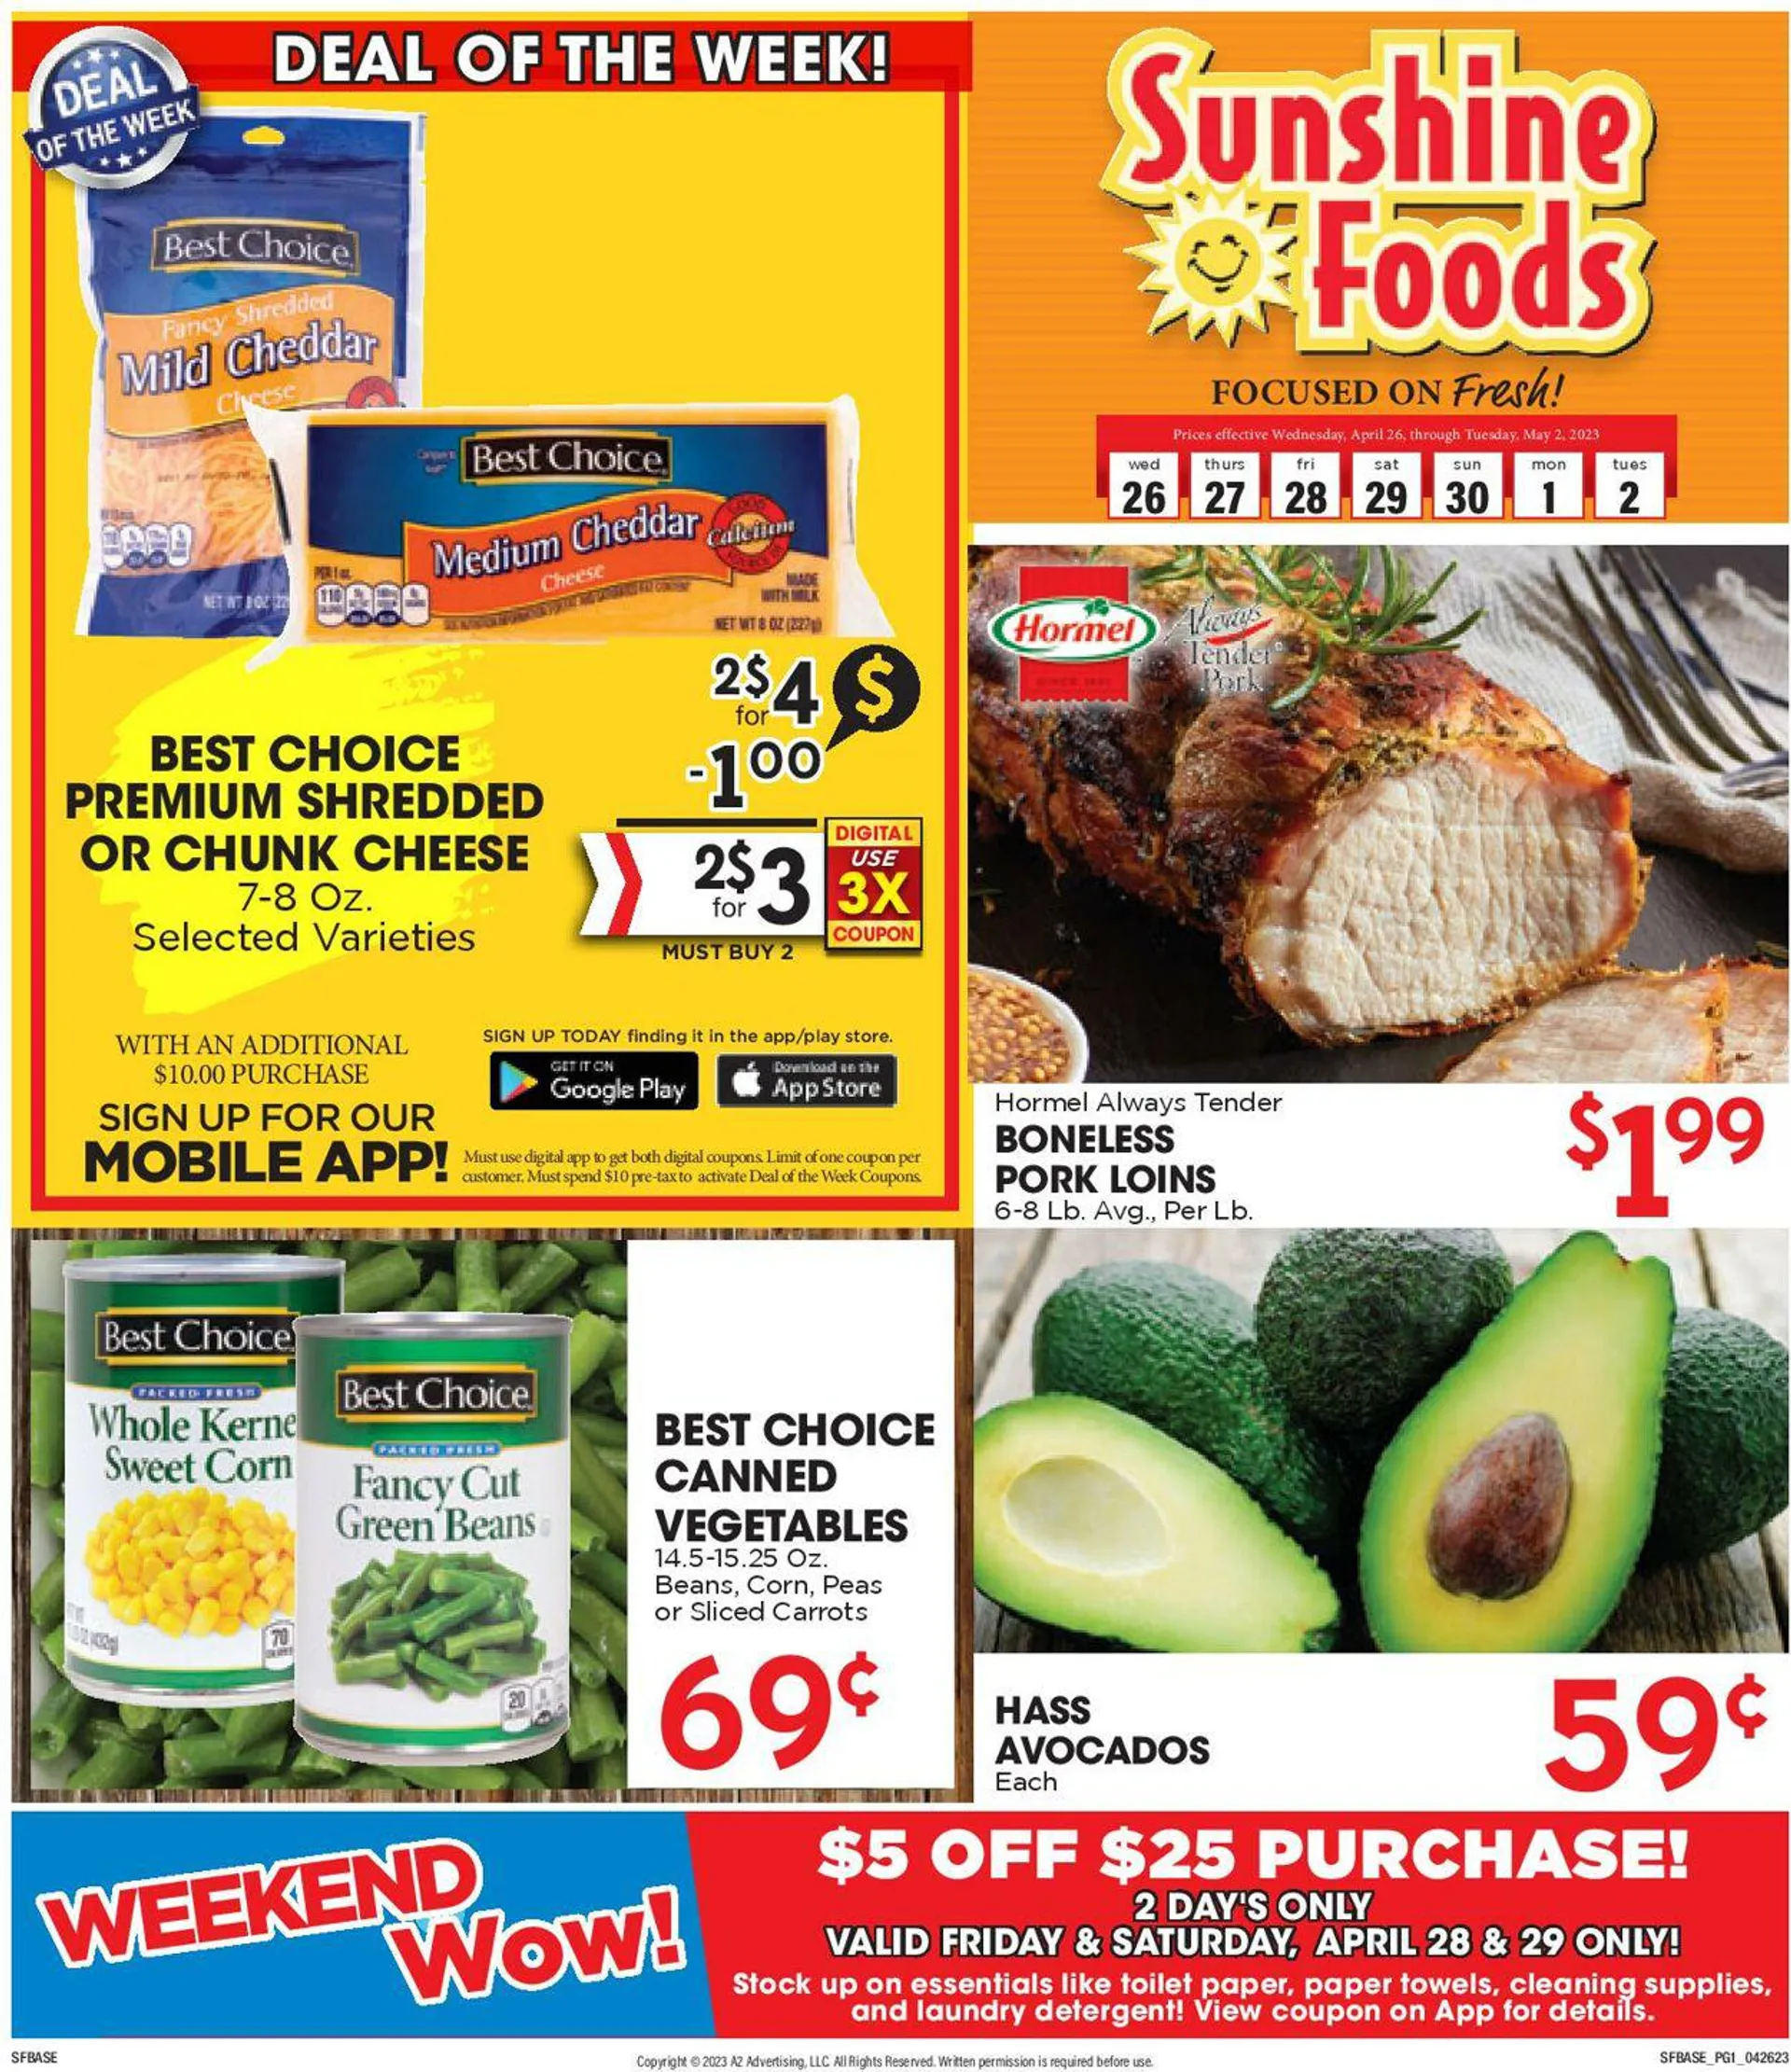 Sunshine Foods Current weekly ad - 1